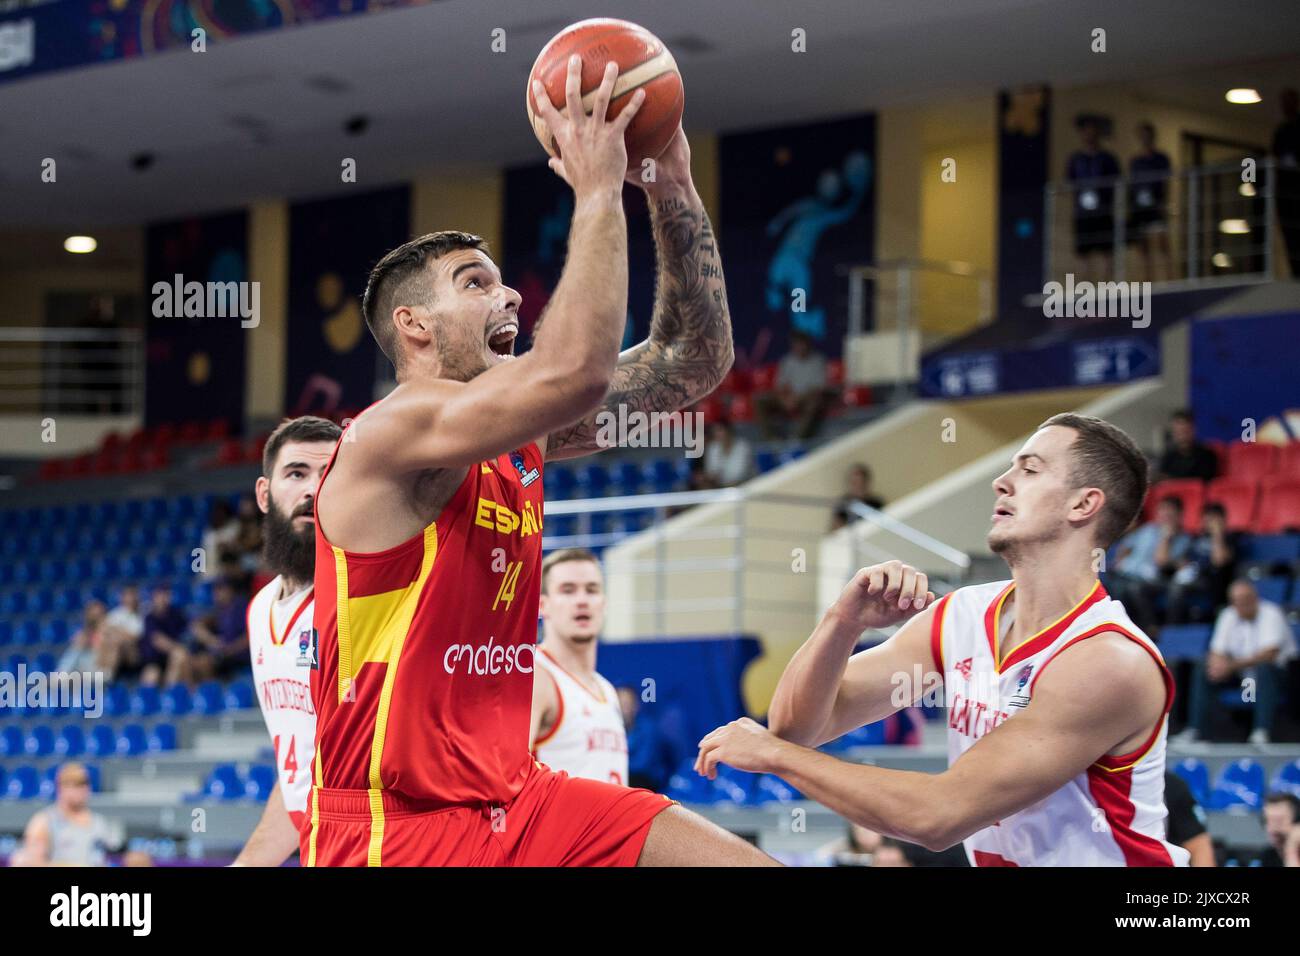 Tbilisi, Georgia, 6th September 2022. Willy Hernangomze of Spain drives to the basket during the FIBA EuroBasket 2022 group A match between Montenegro and Spain at Tbilisi Arena in Tbilisi, Georgia. September 6, 2022. Credit: Nikola Krstic/Alamy Stock Photo